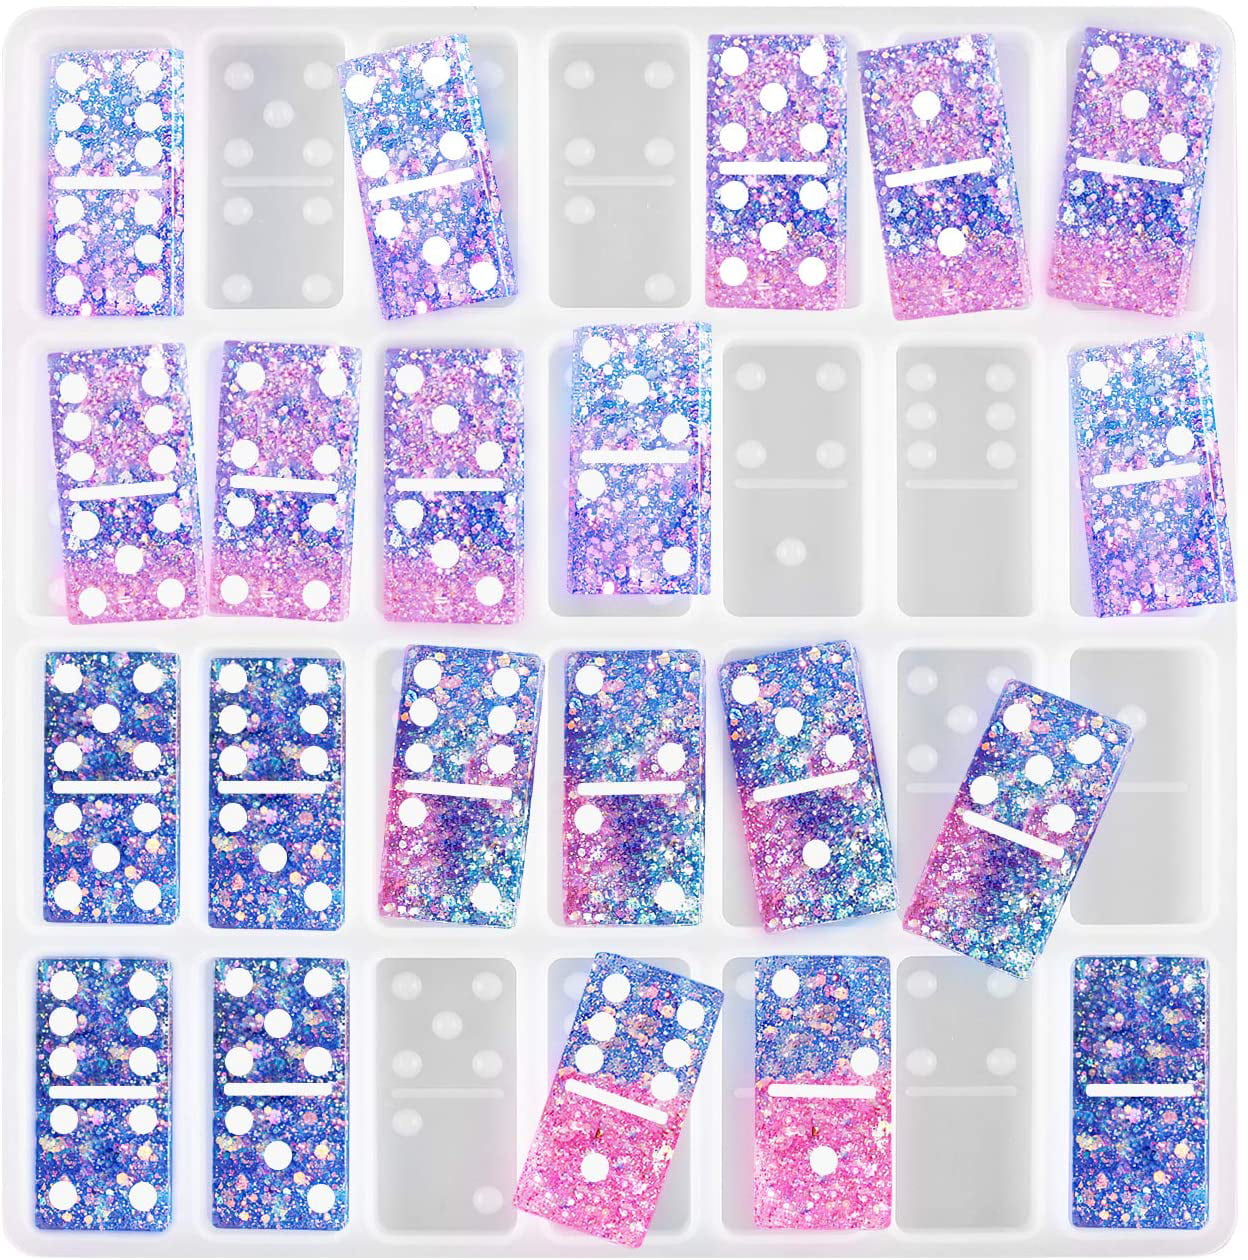 Silicone Dominoes Game Toy Making Mold Resin Epoxy Craft DIY Mould Casting A8Y9 